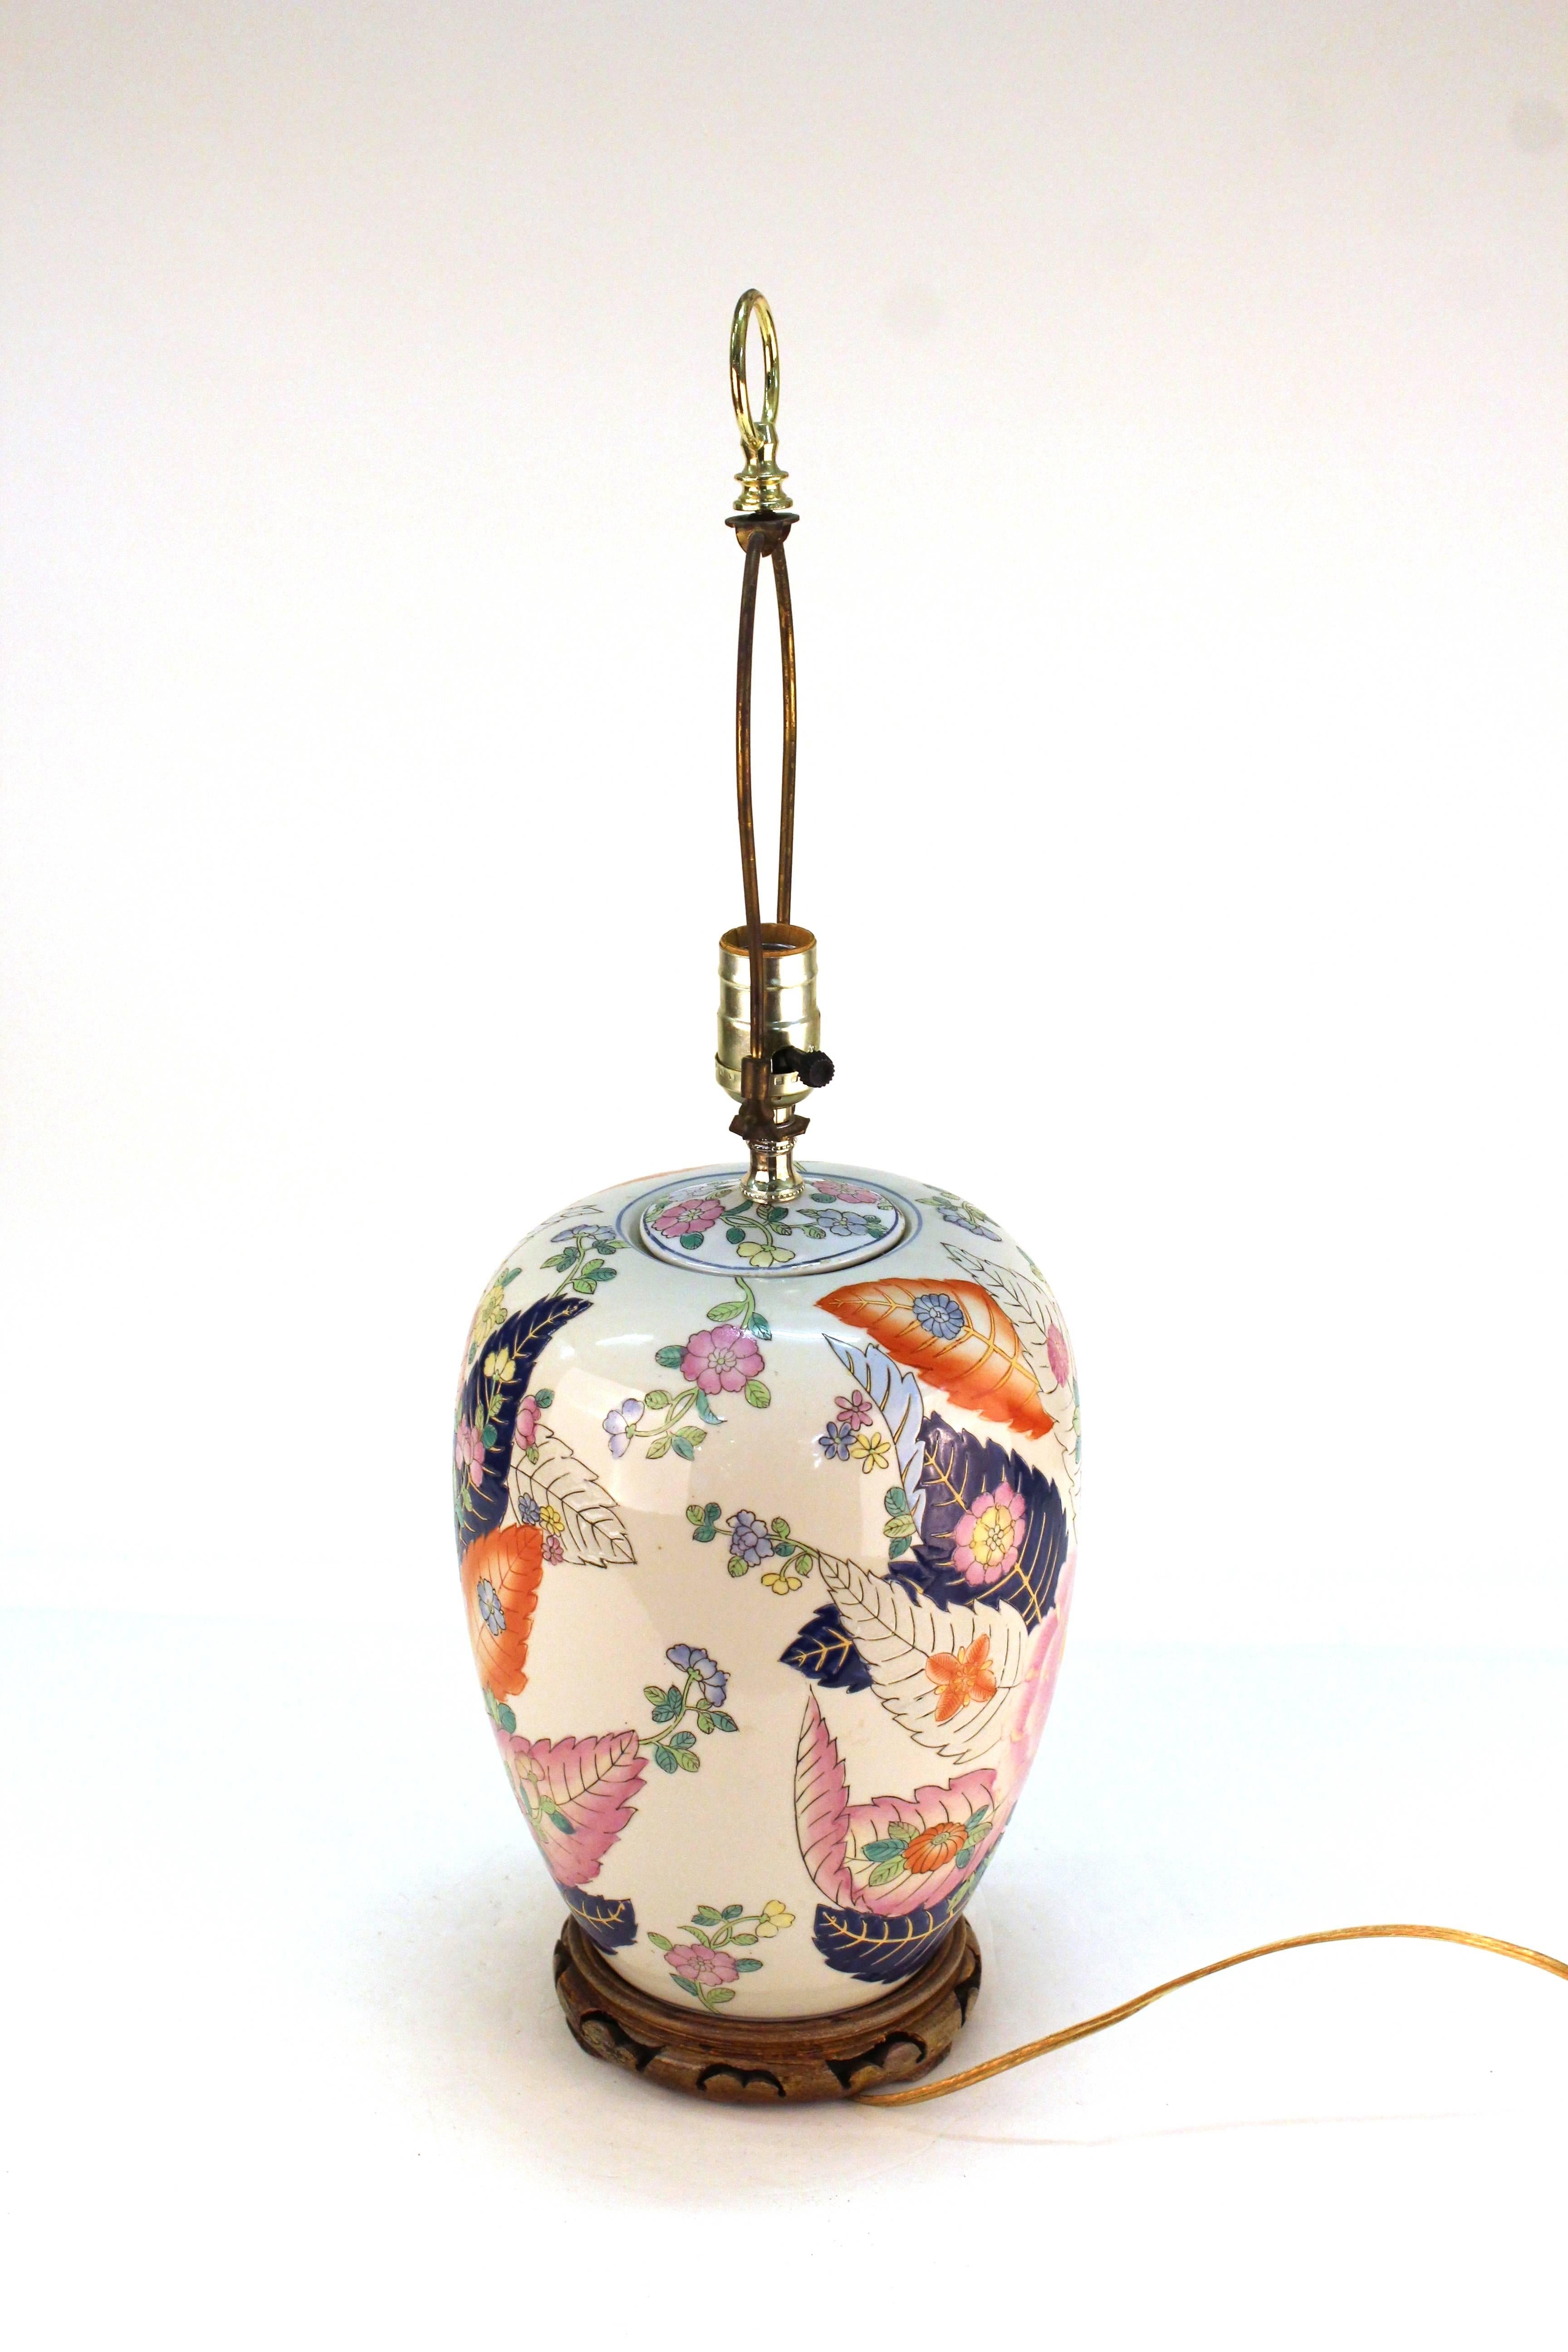 A Chinese porcelain jar table lamp with a motif of tobacco leaves in pink, orange and blue. The piece is in good vintage condition.